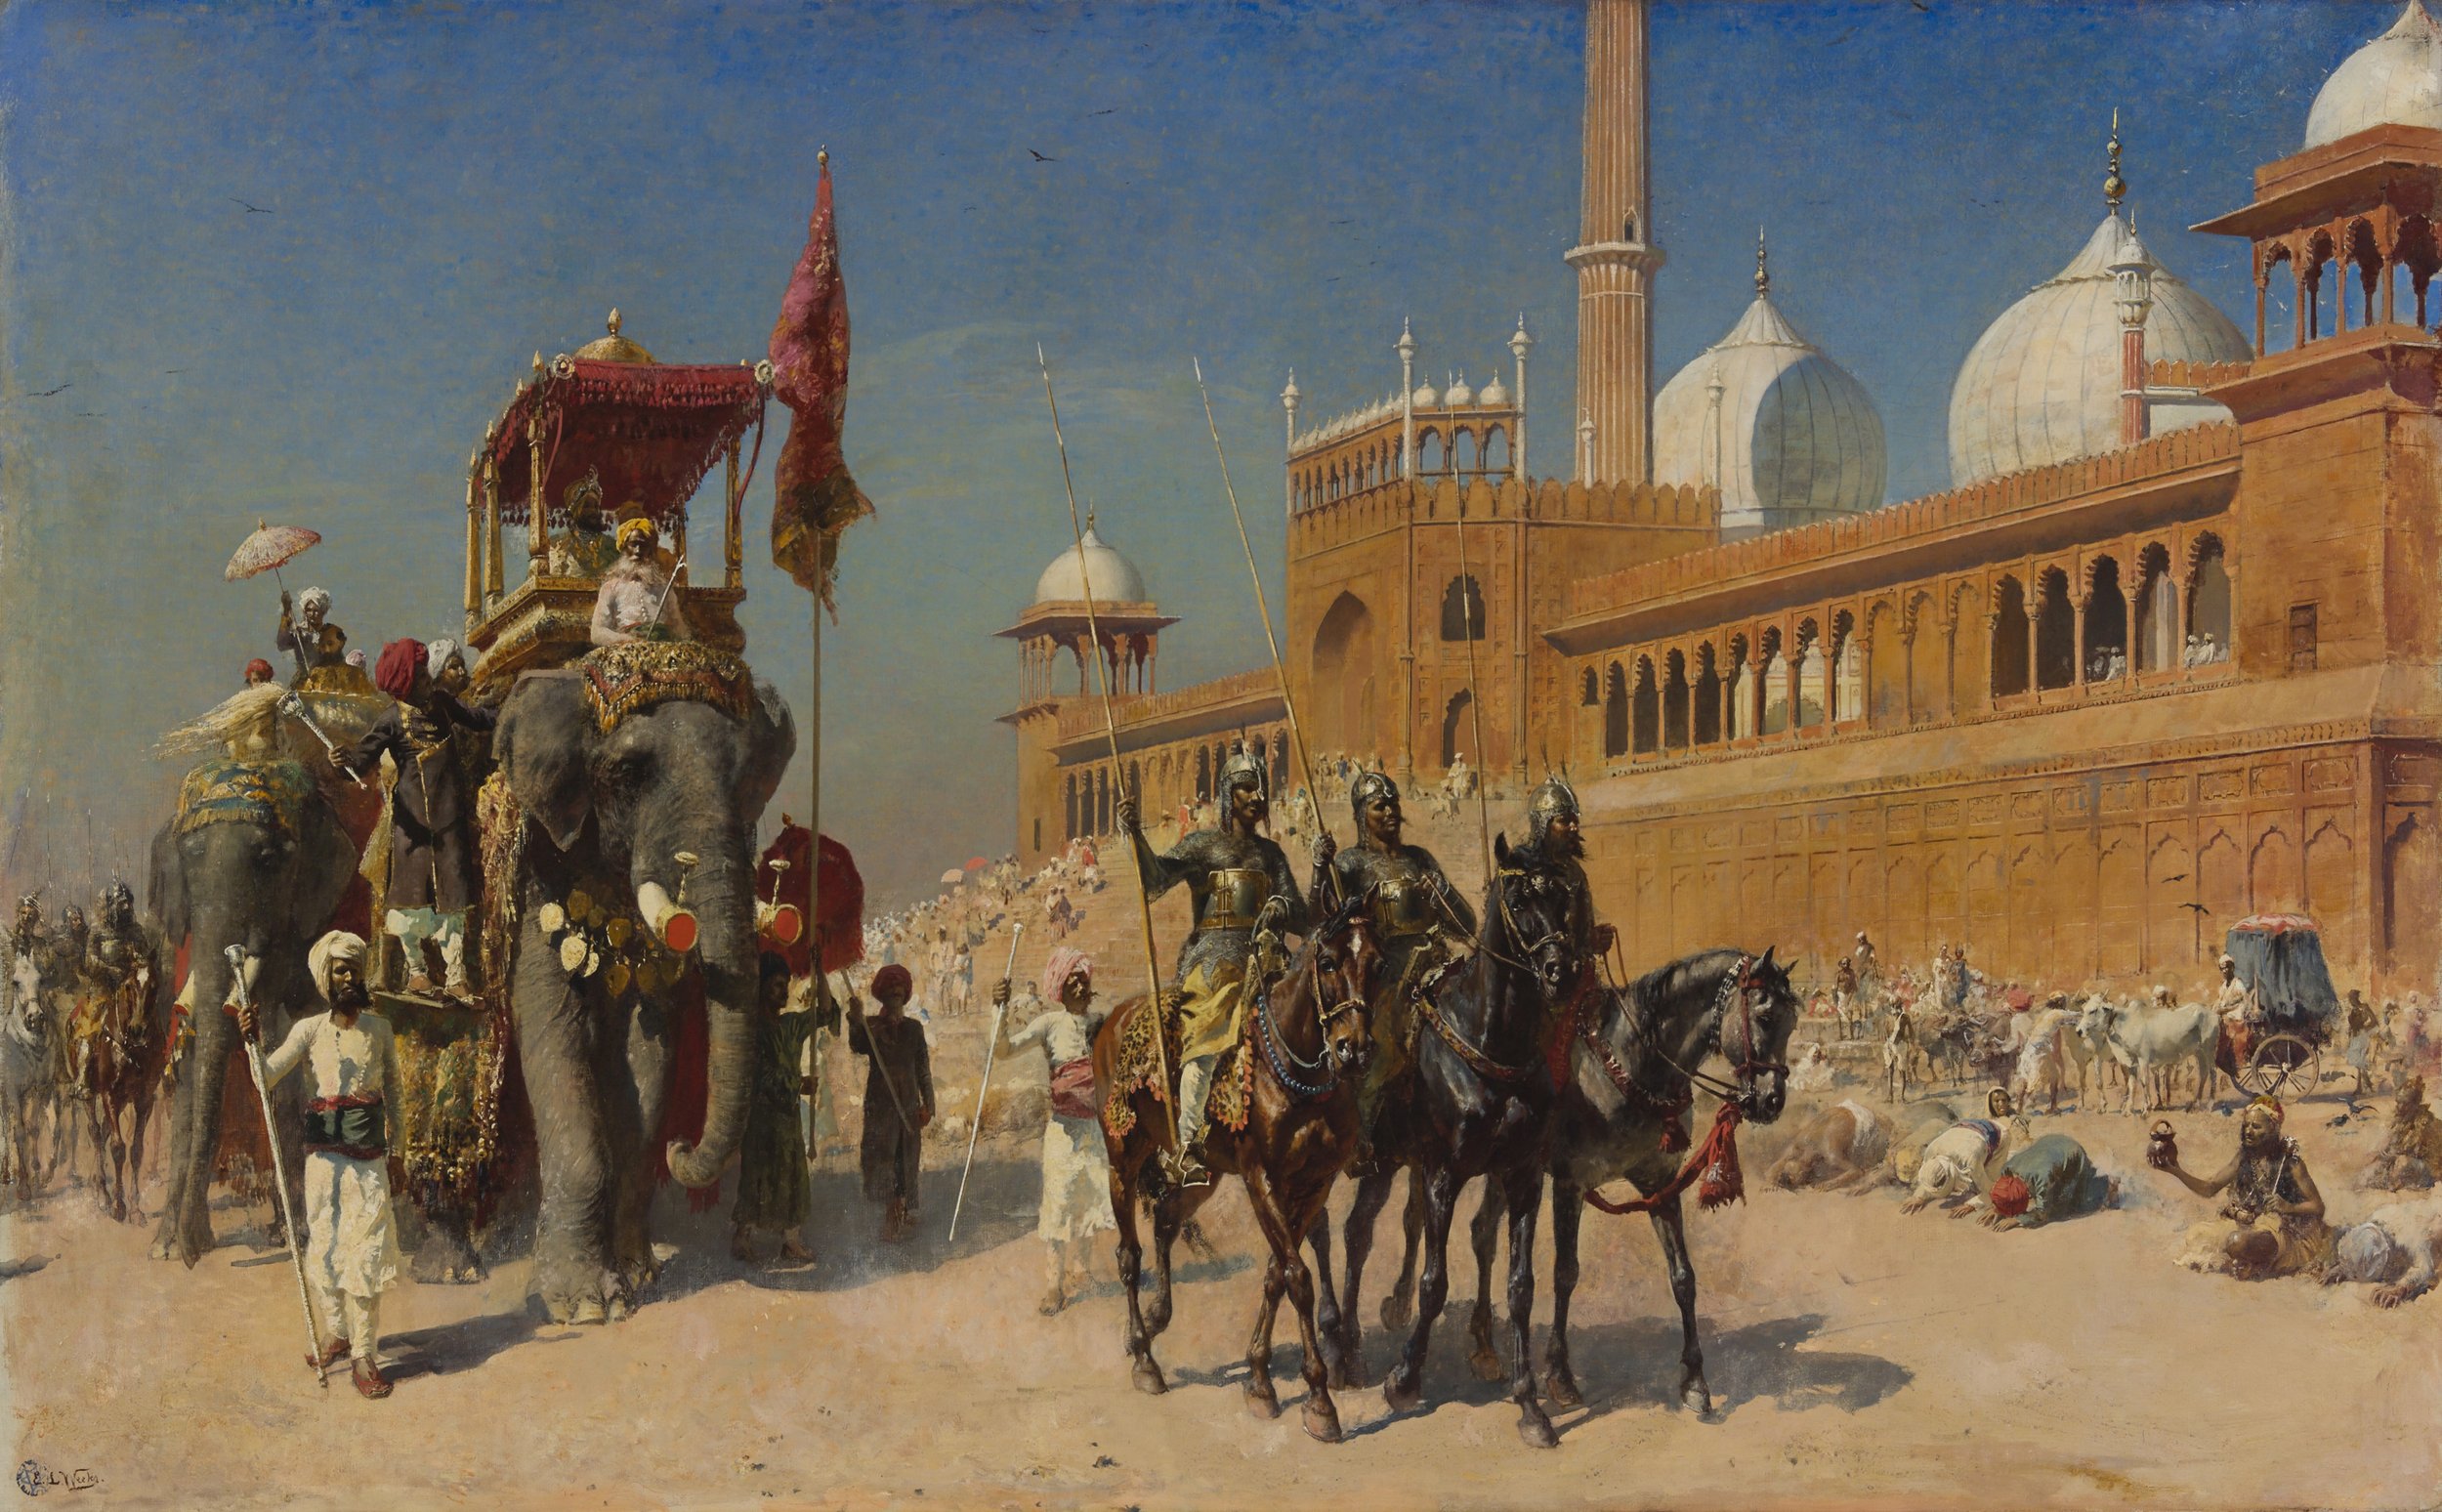 Mythmaking as Spectacle, "The Great Mogul and His Court Returning from the Great Mosque at Delhi, India" | Edwin Lord Weeks